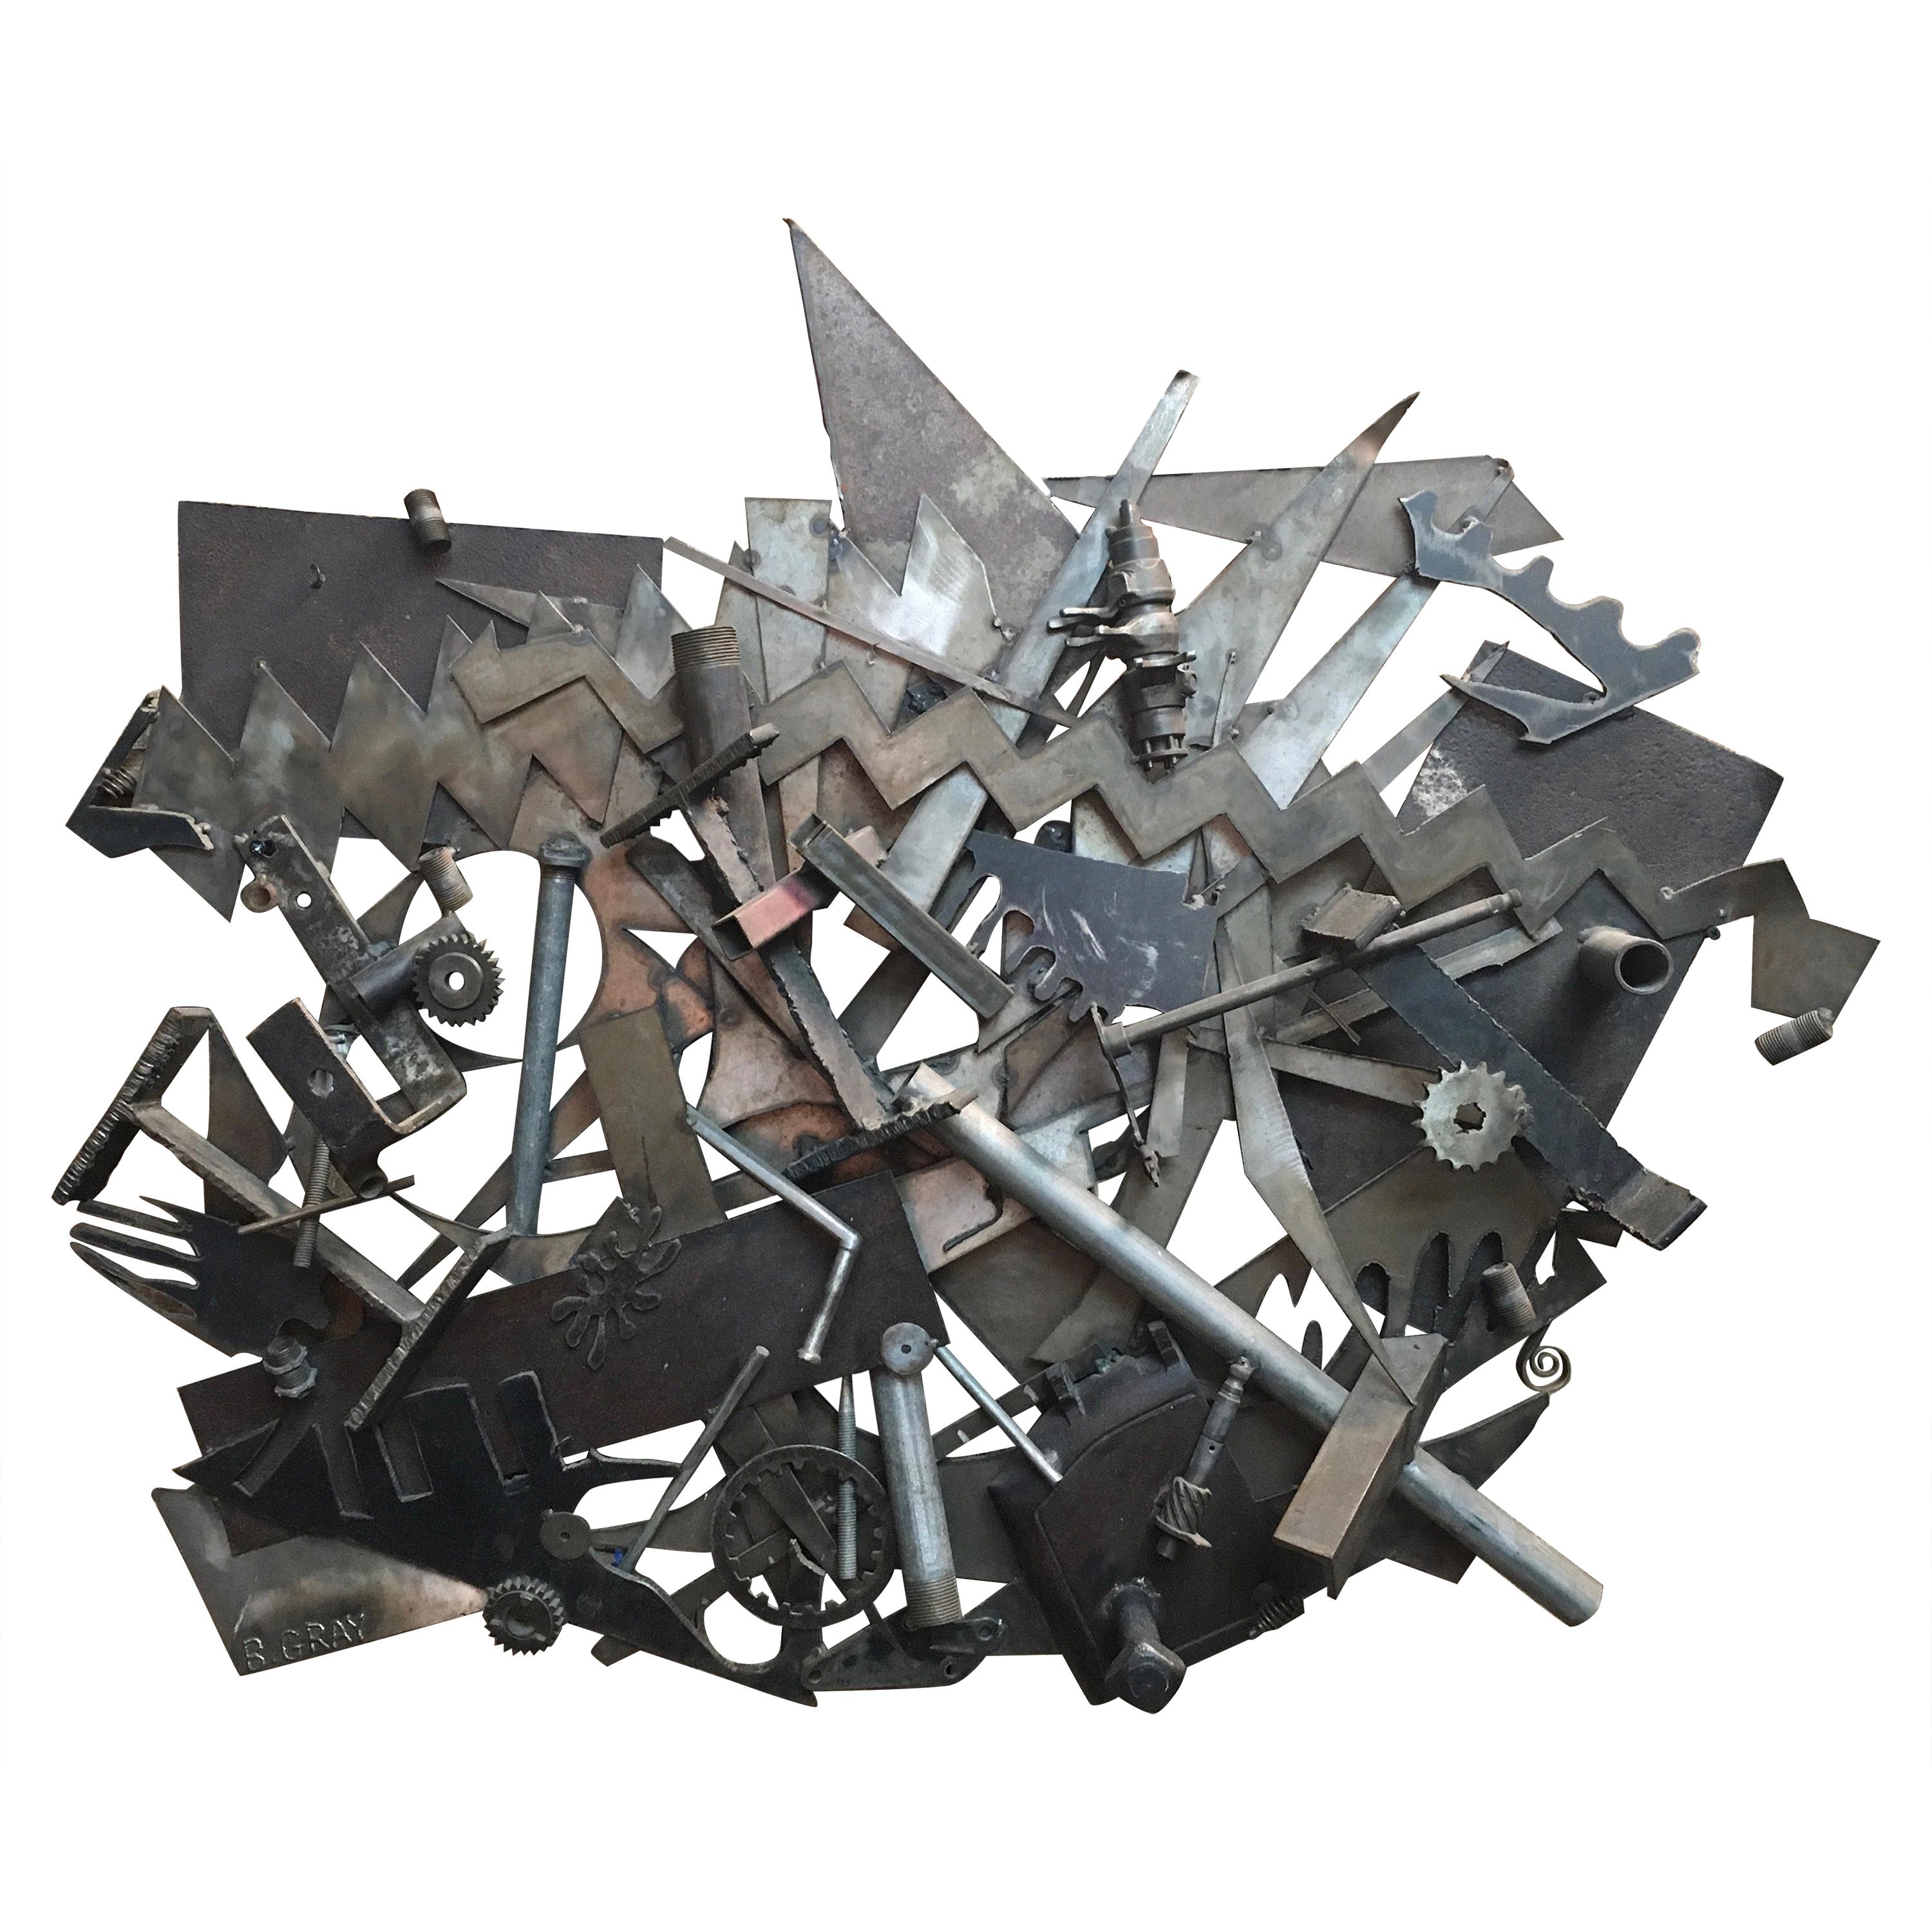 Steel with Found Objects Brutal Wall Sculpture by Bruce Gray